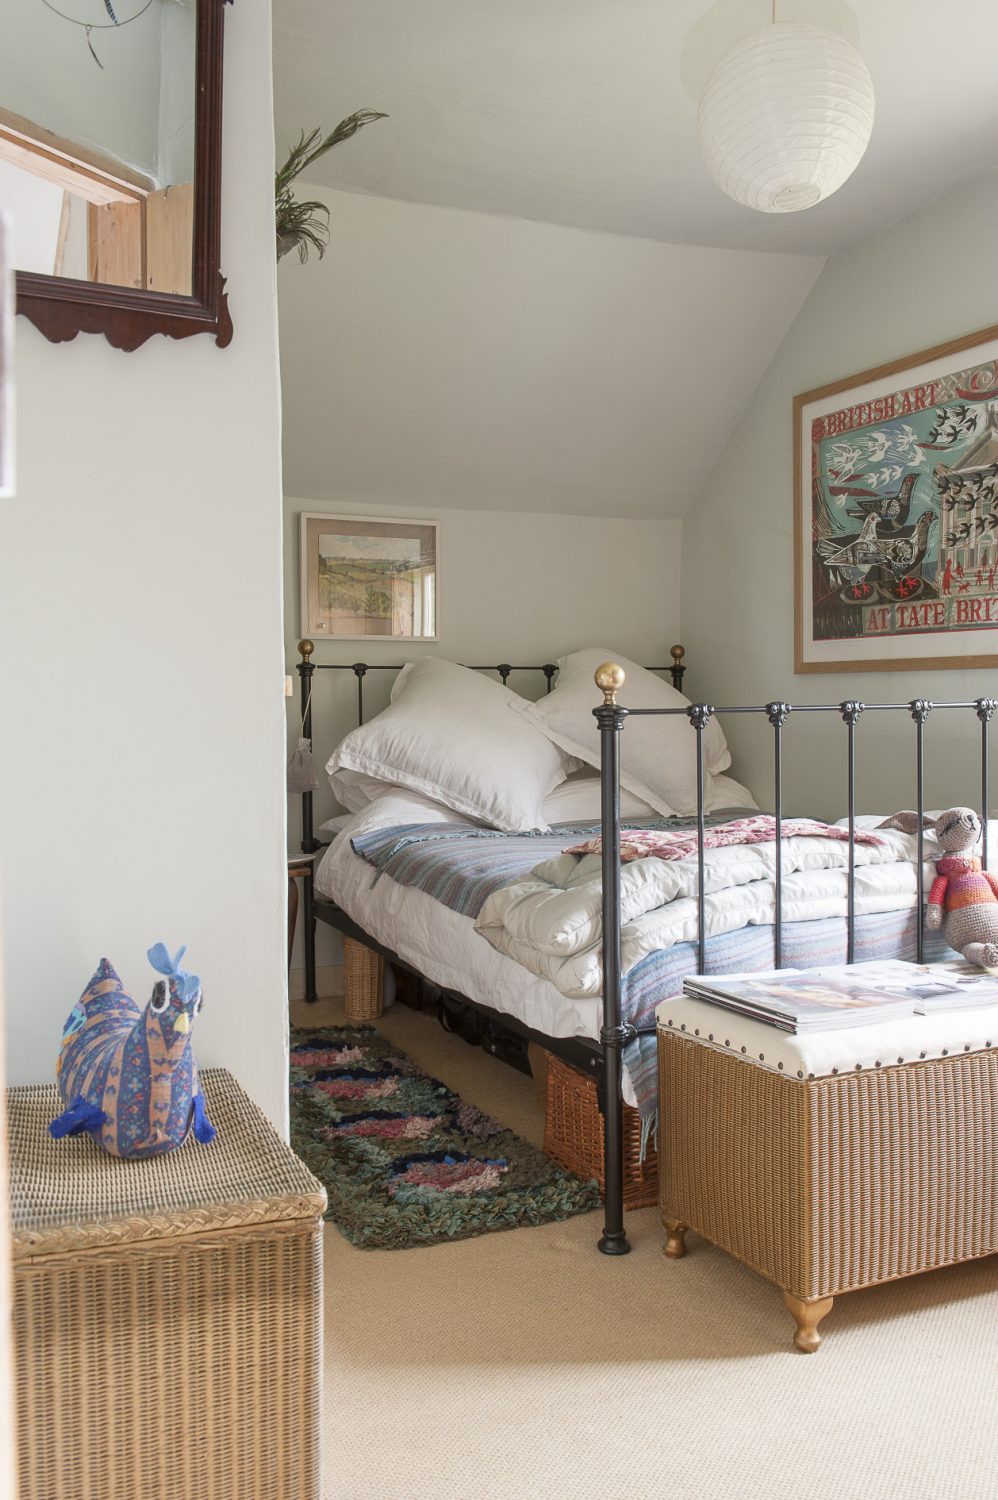 The bed in the guest room is dressed with an invitingly cosy eiderdown and plump pillows